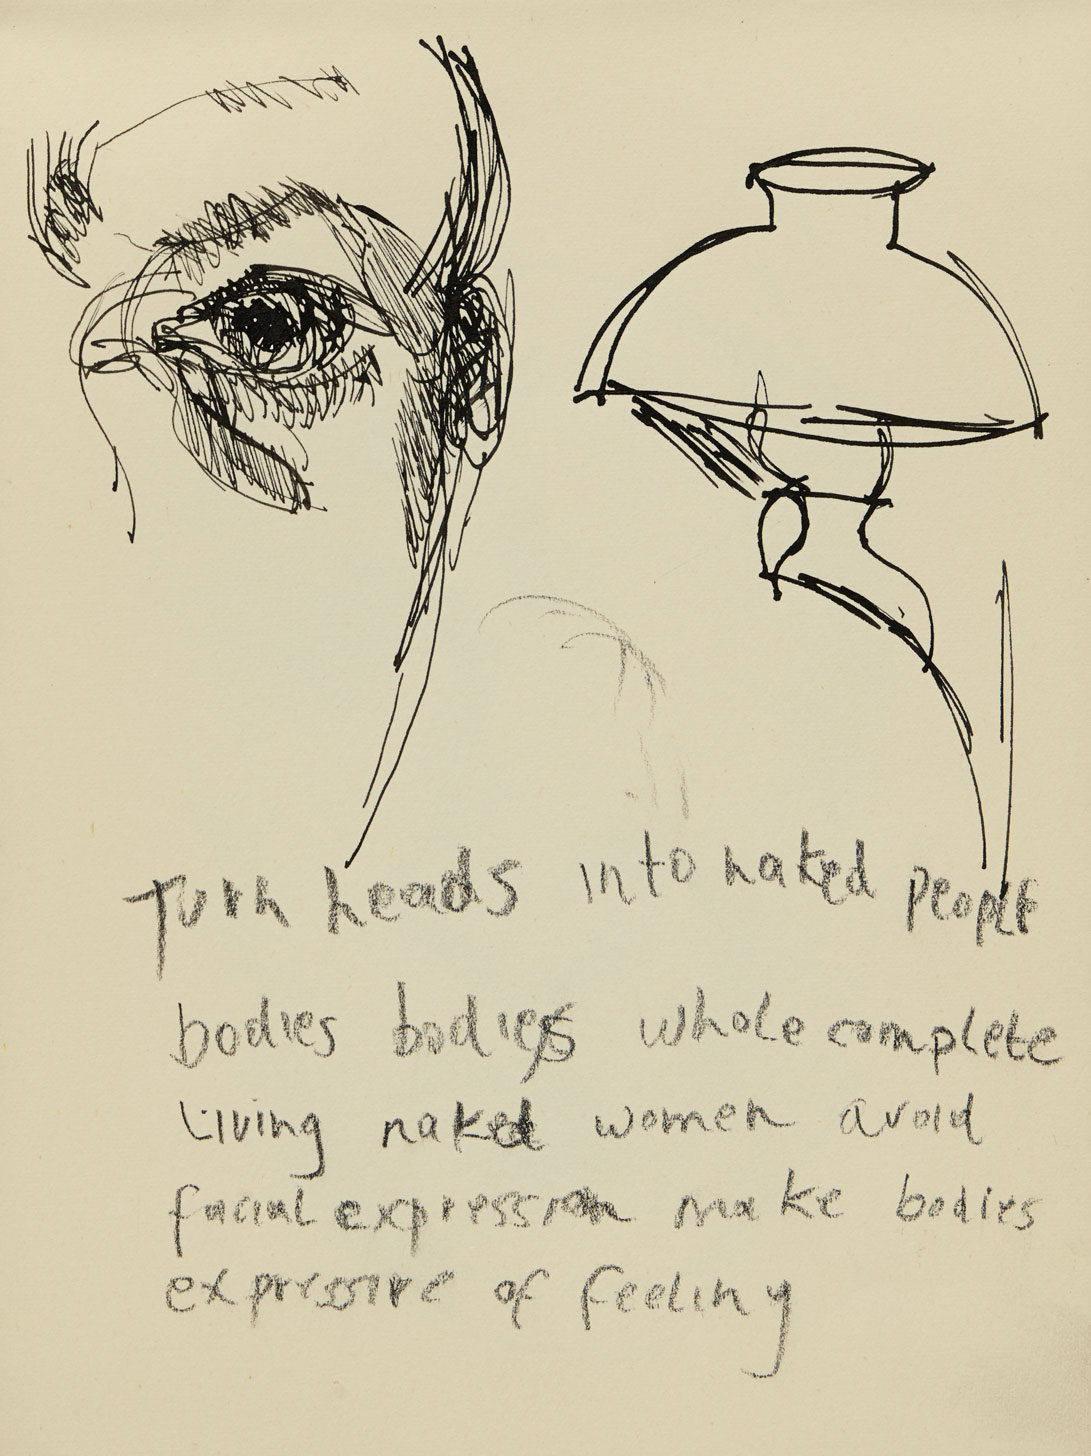 Lucian Freud: Self-portrait with lamp and text, date unknown